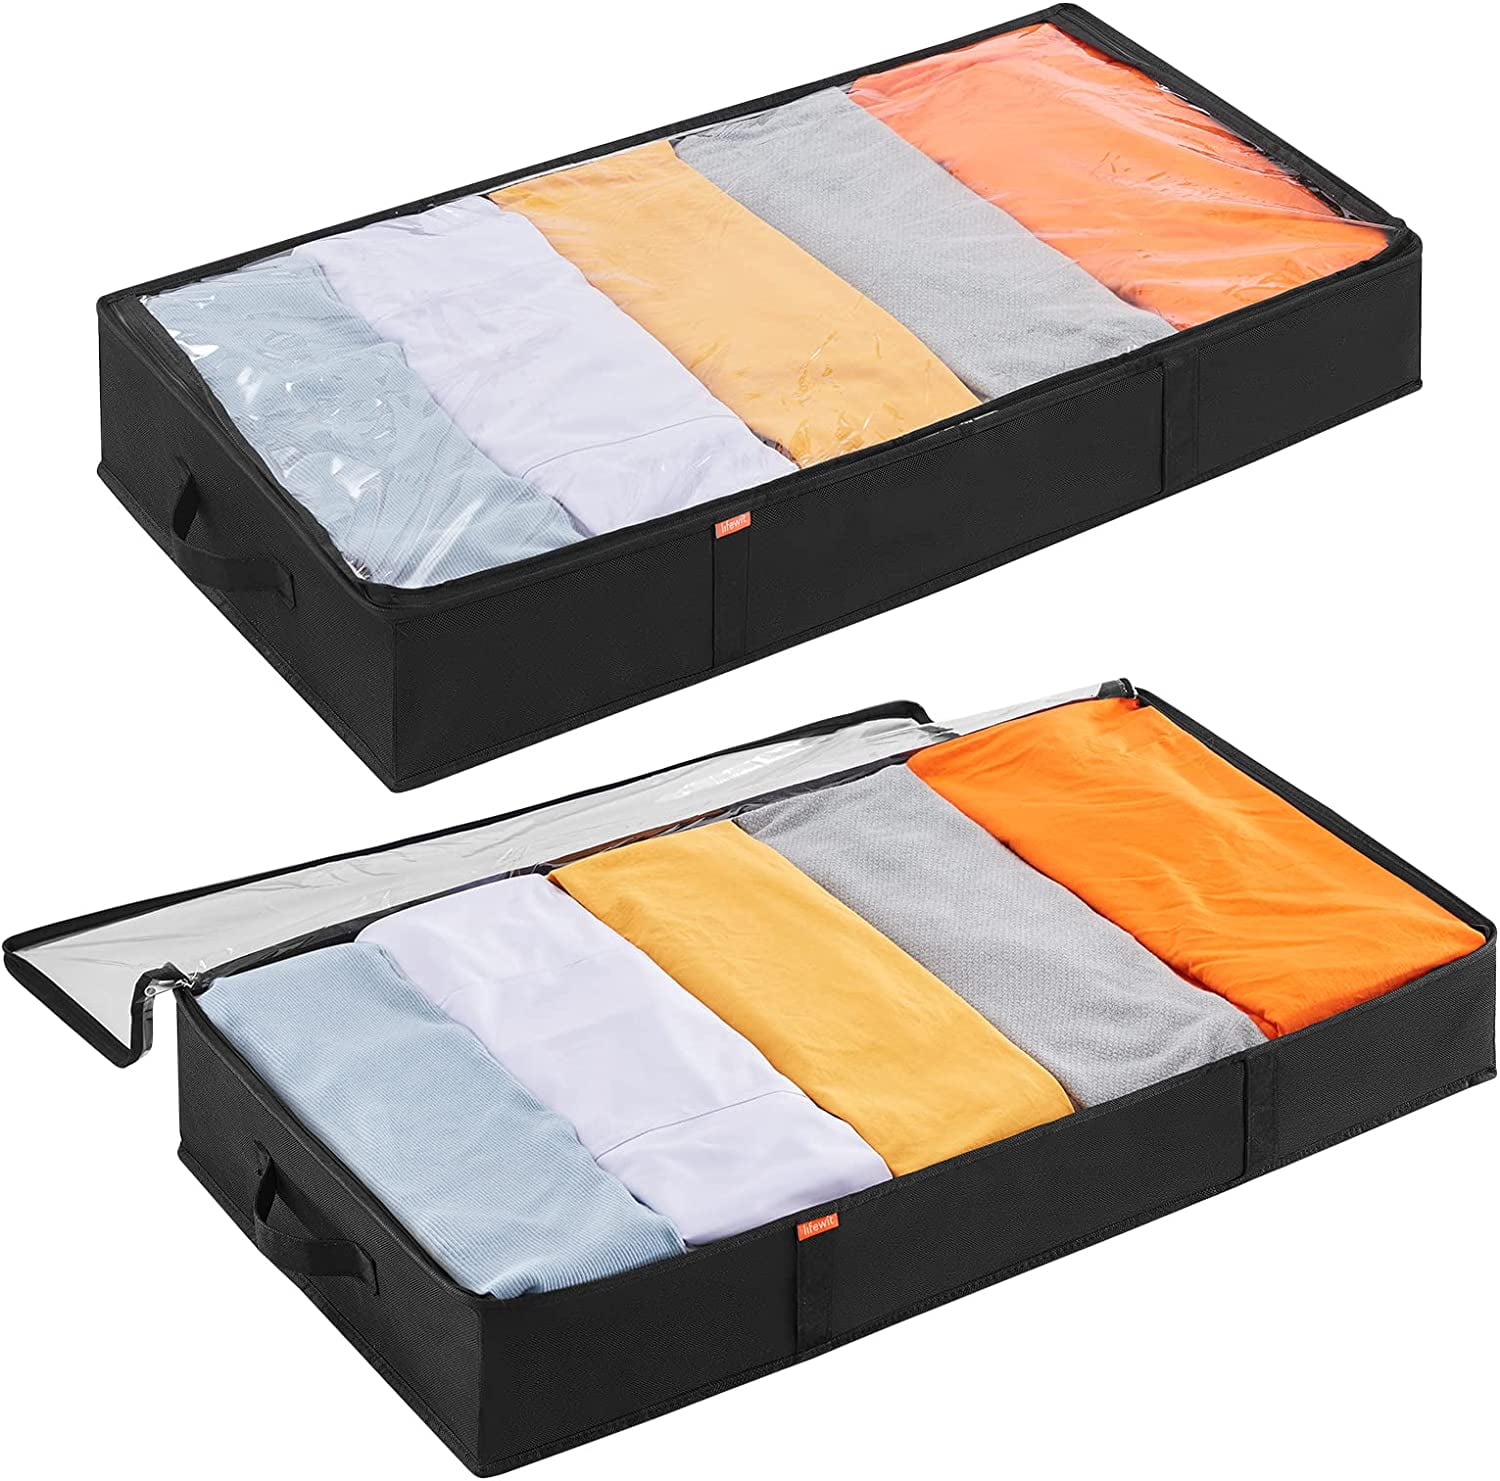 Lifewit Under Bed Shoe Storage Organizer Set of 2, Foldable Fabric Shoes  Container Box with Clear Cover See Through Window Storage Bag with 2  Handles